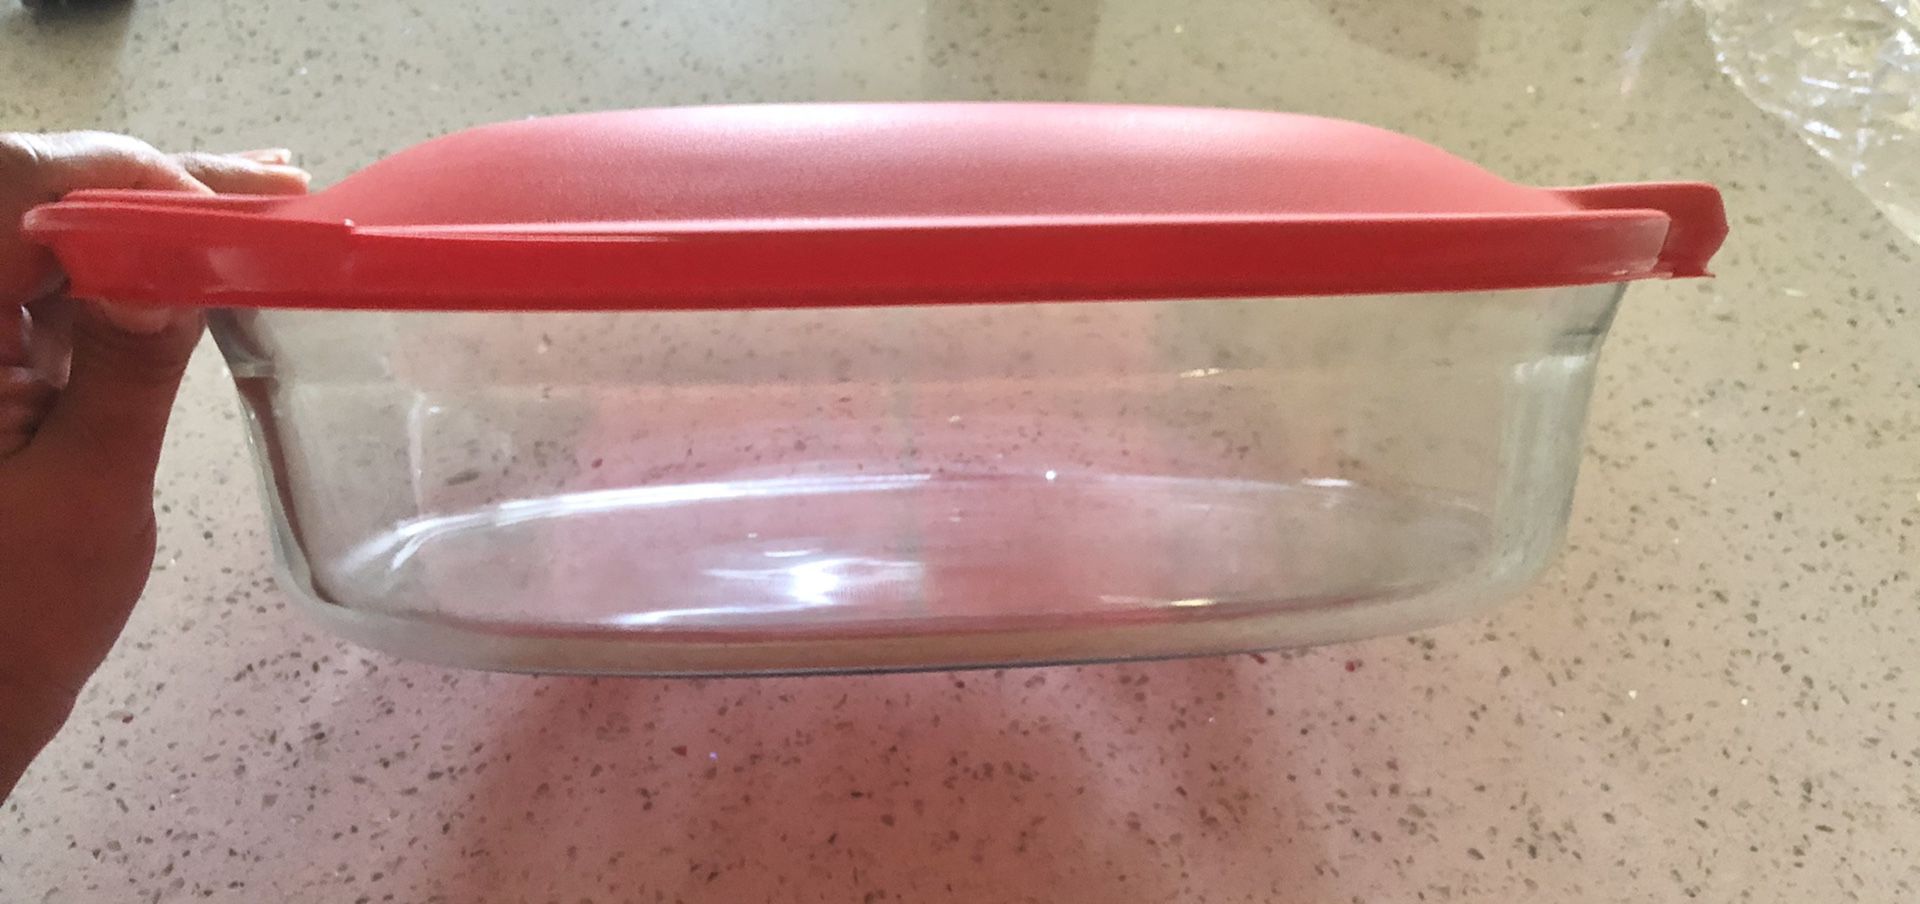 Brand new Pyrex bowl with lid - 2.5 qt